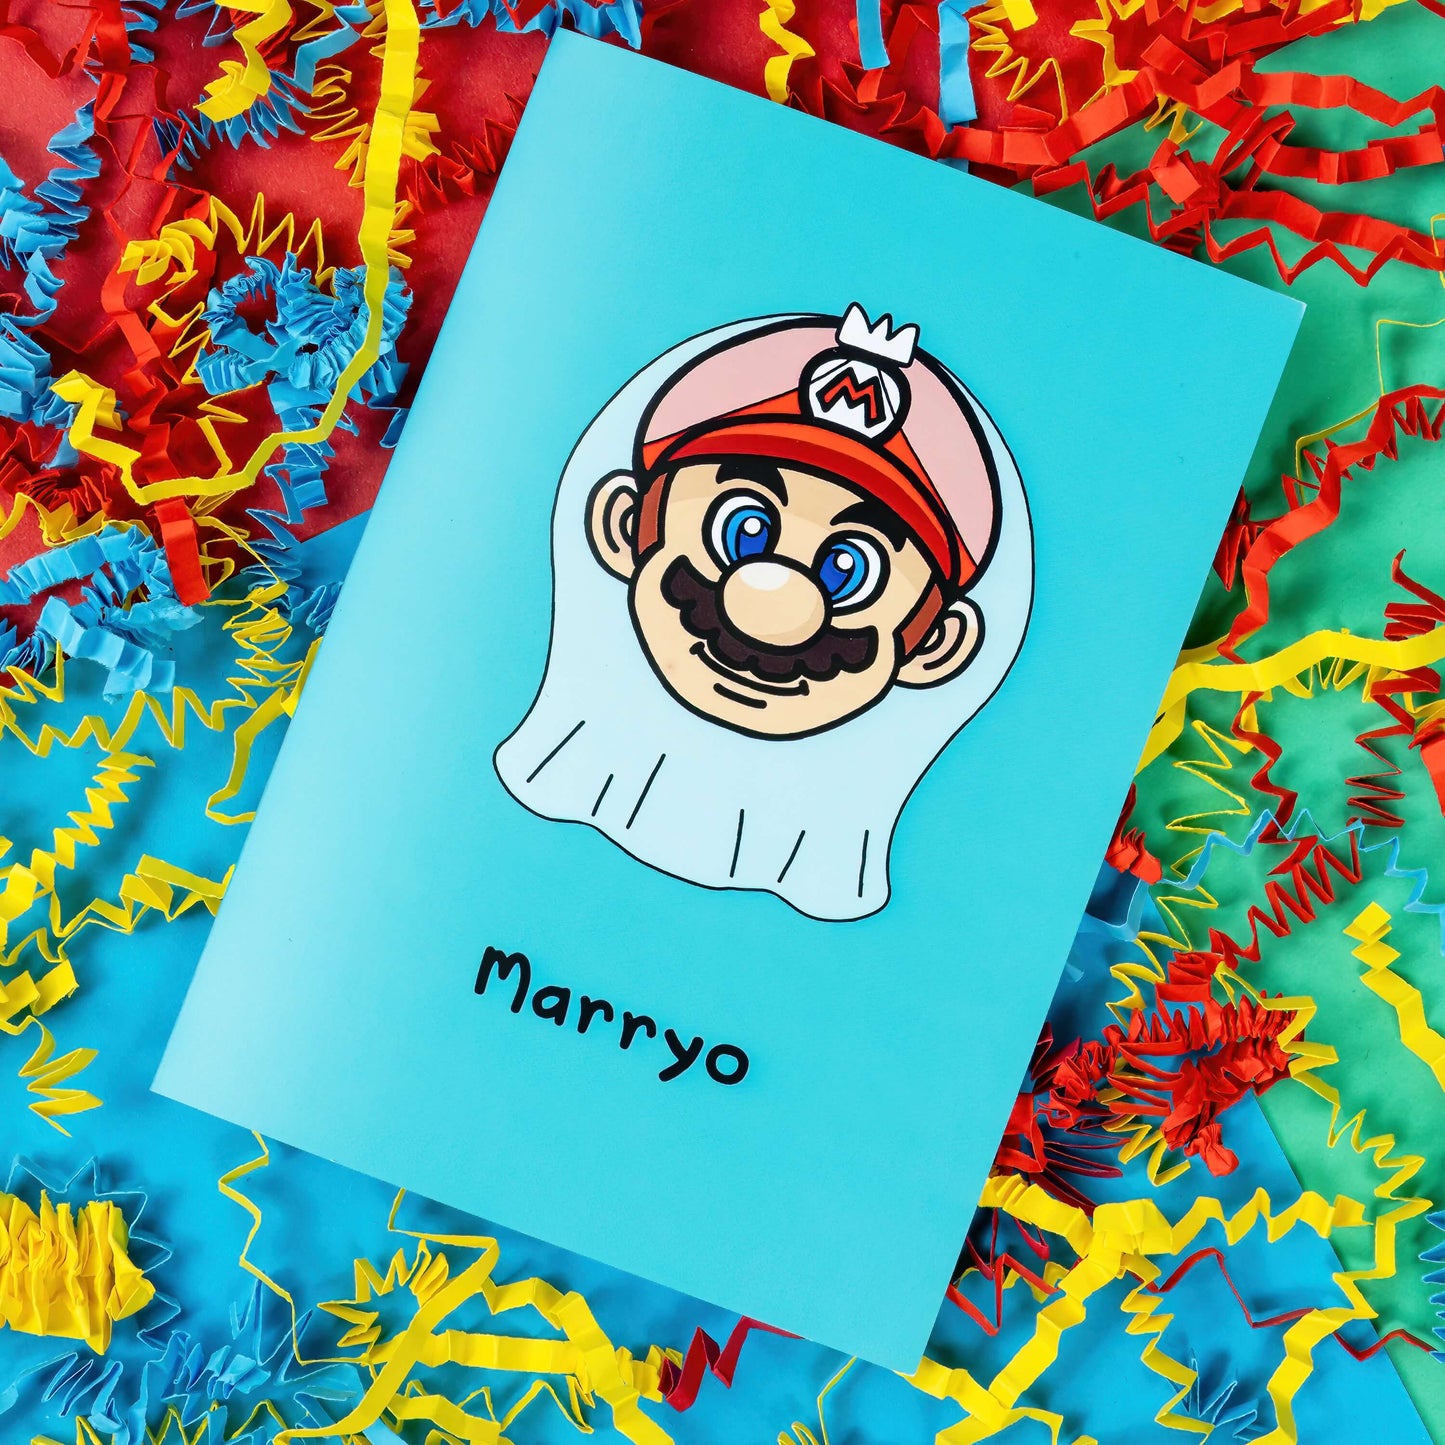 The Marryo - Mario Engagement Wedding Card on a red, blue and green background with red, yellow and blue crinkle card confetti. The blue a6 congratulations card features a smiling nintendo mario character head wearing a white bridal wedding veil, underneath him is black text reading 'Marryo'.